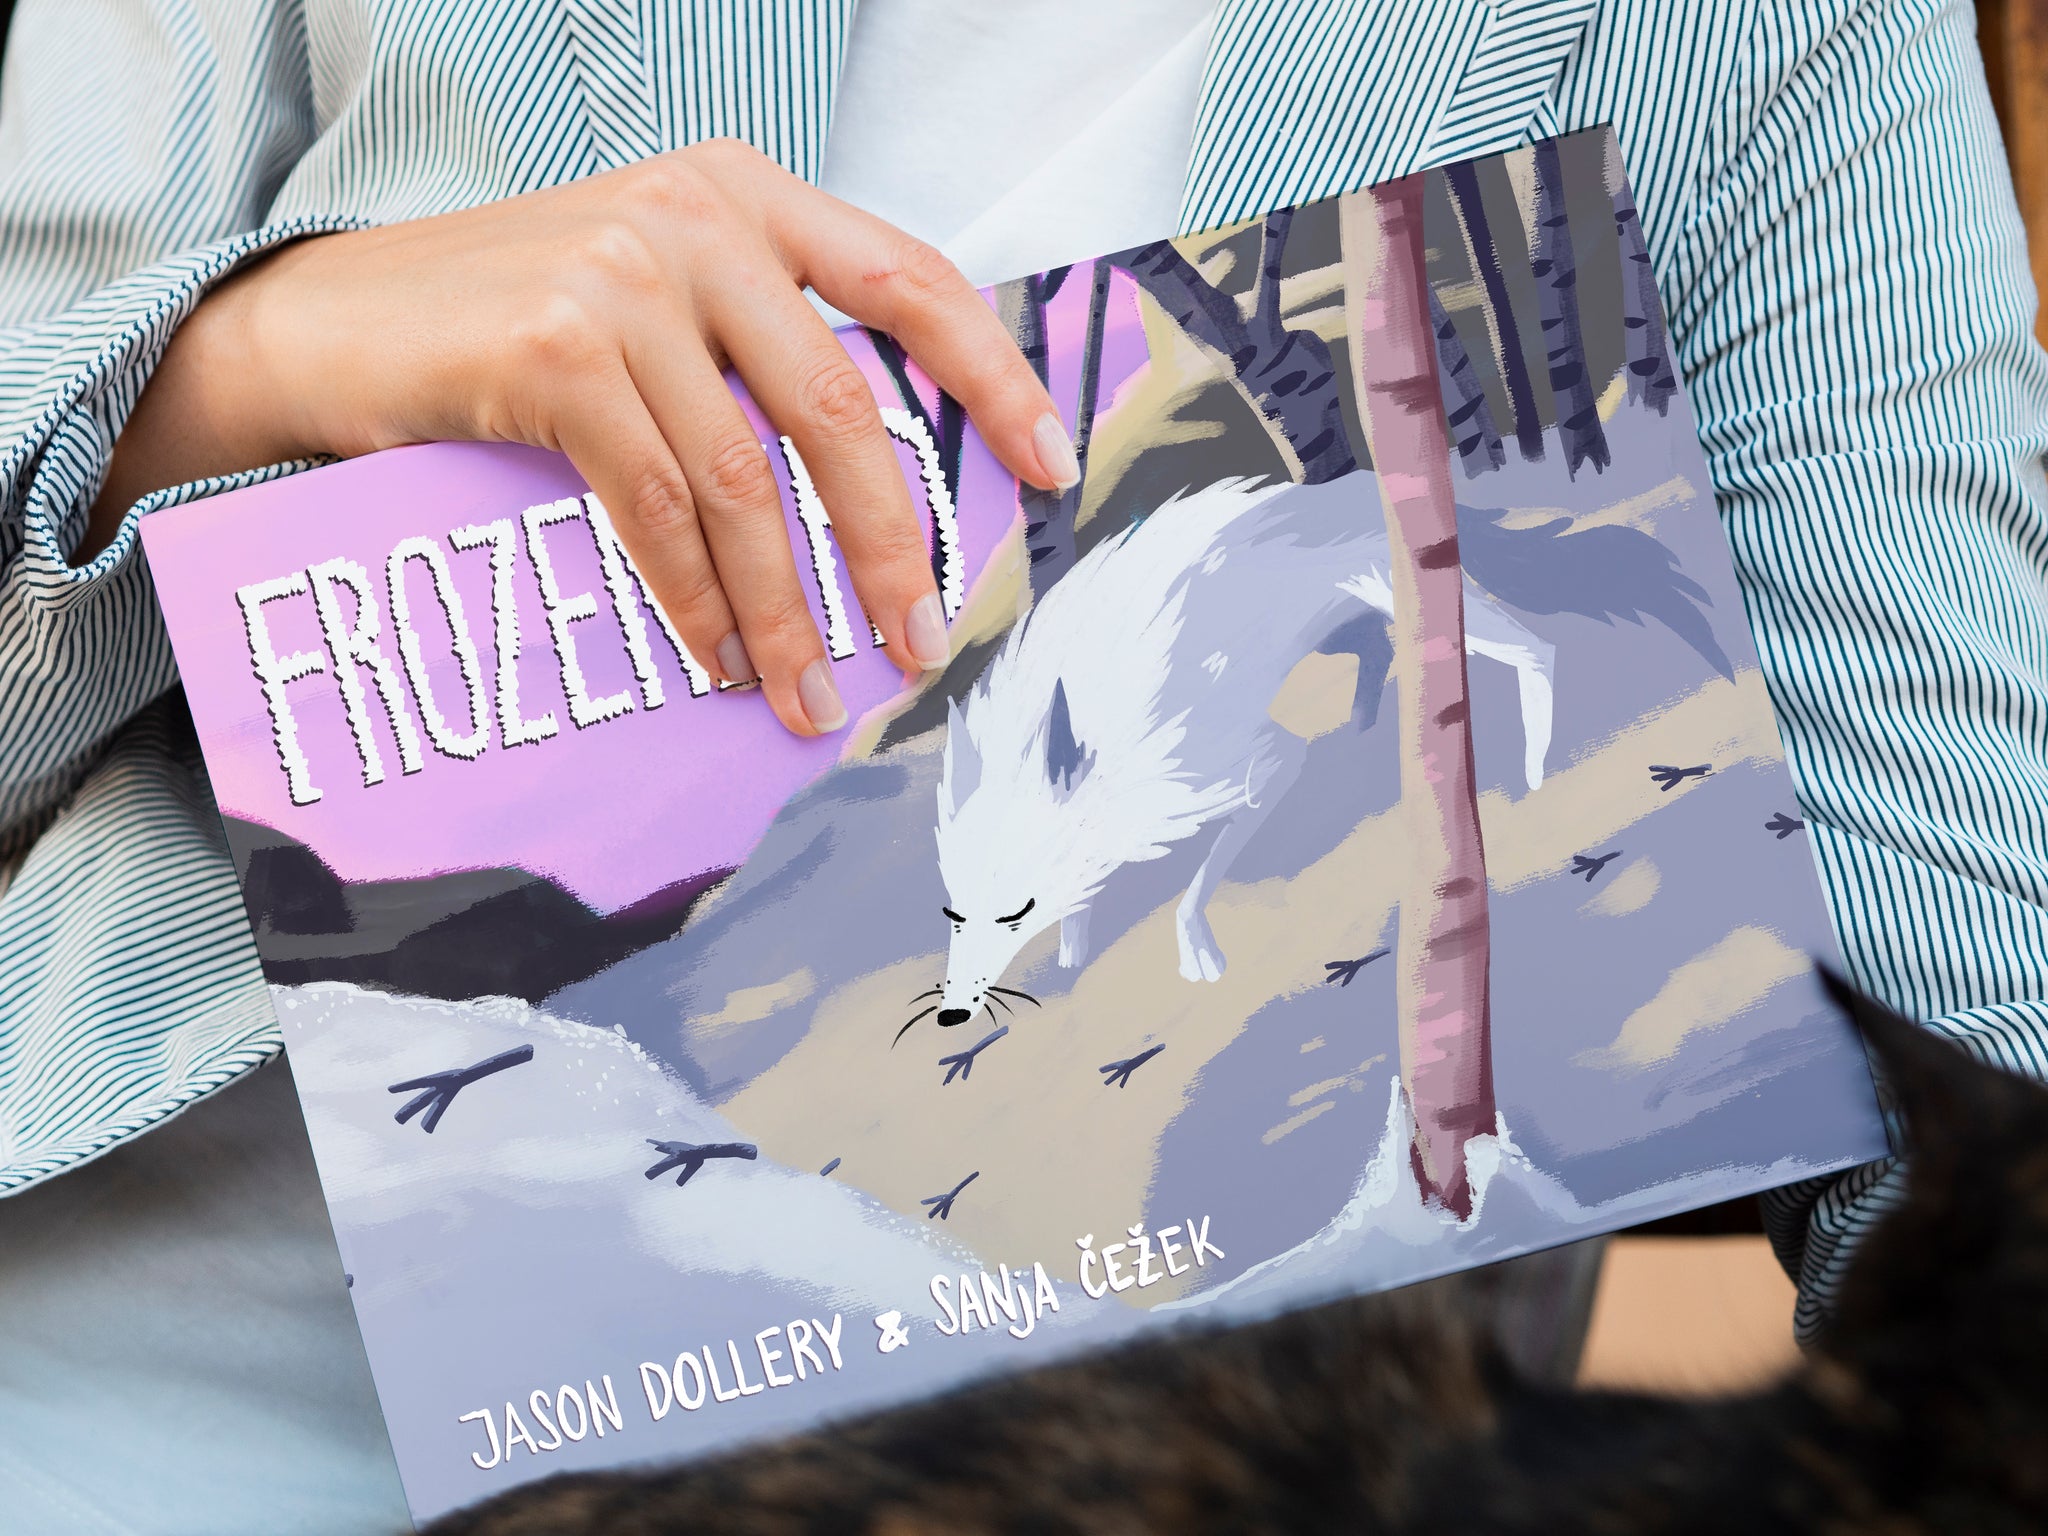 The "Frozenbird" Story is available for purchase!